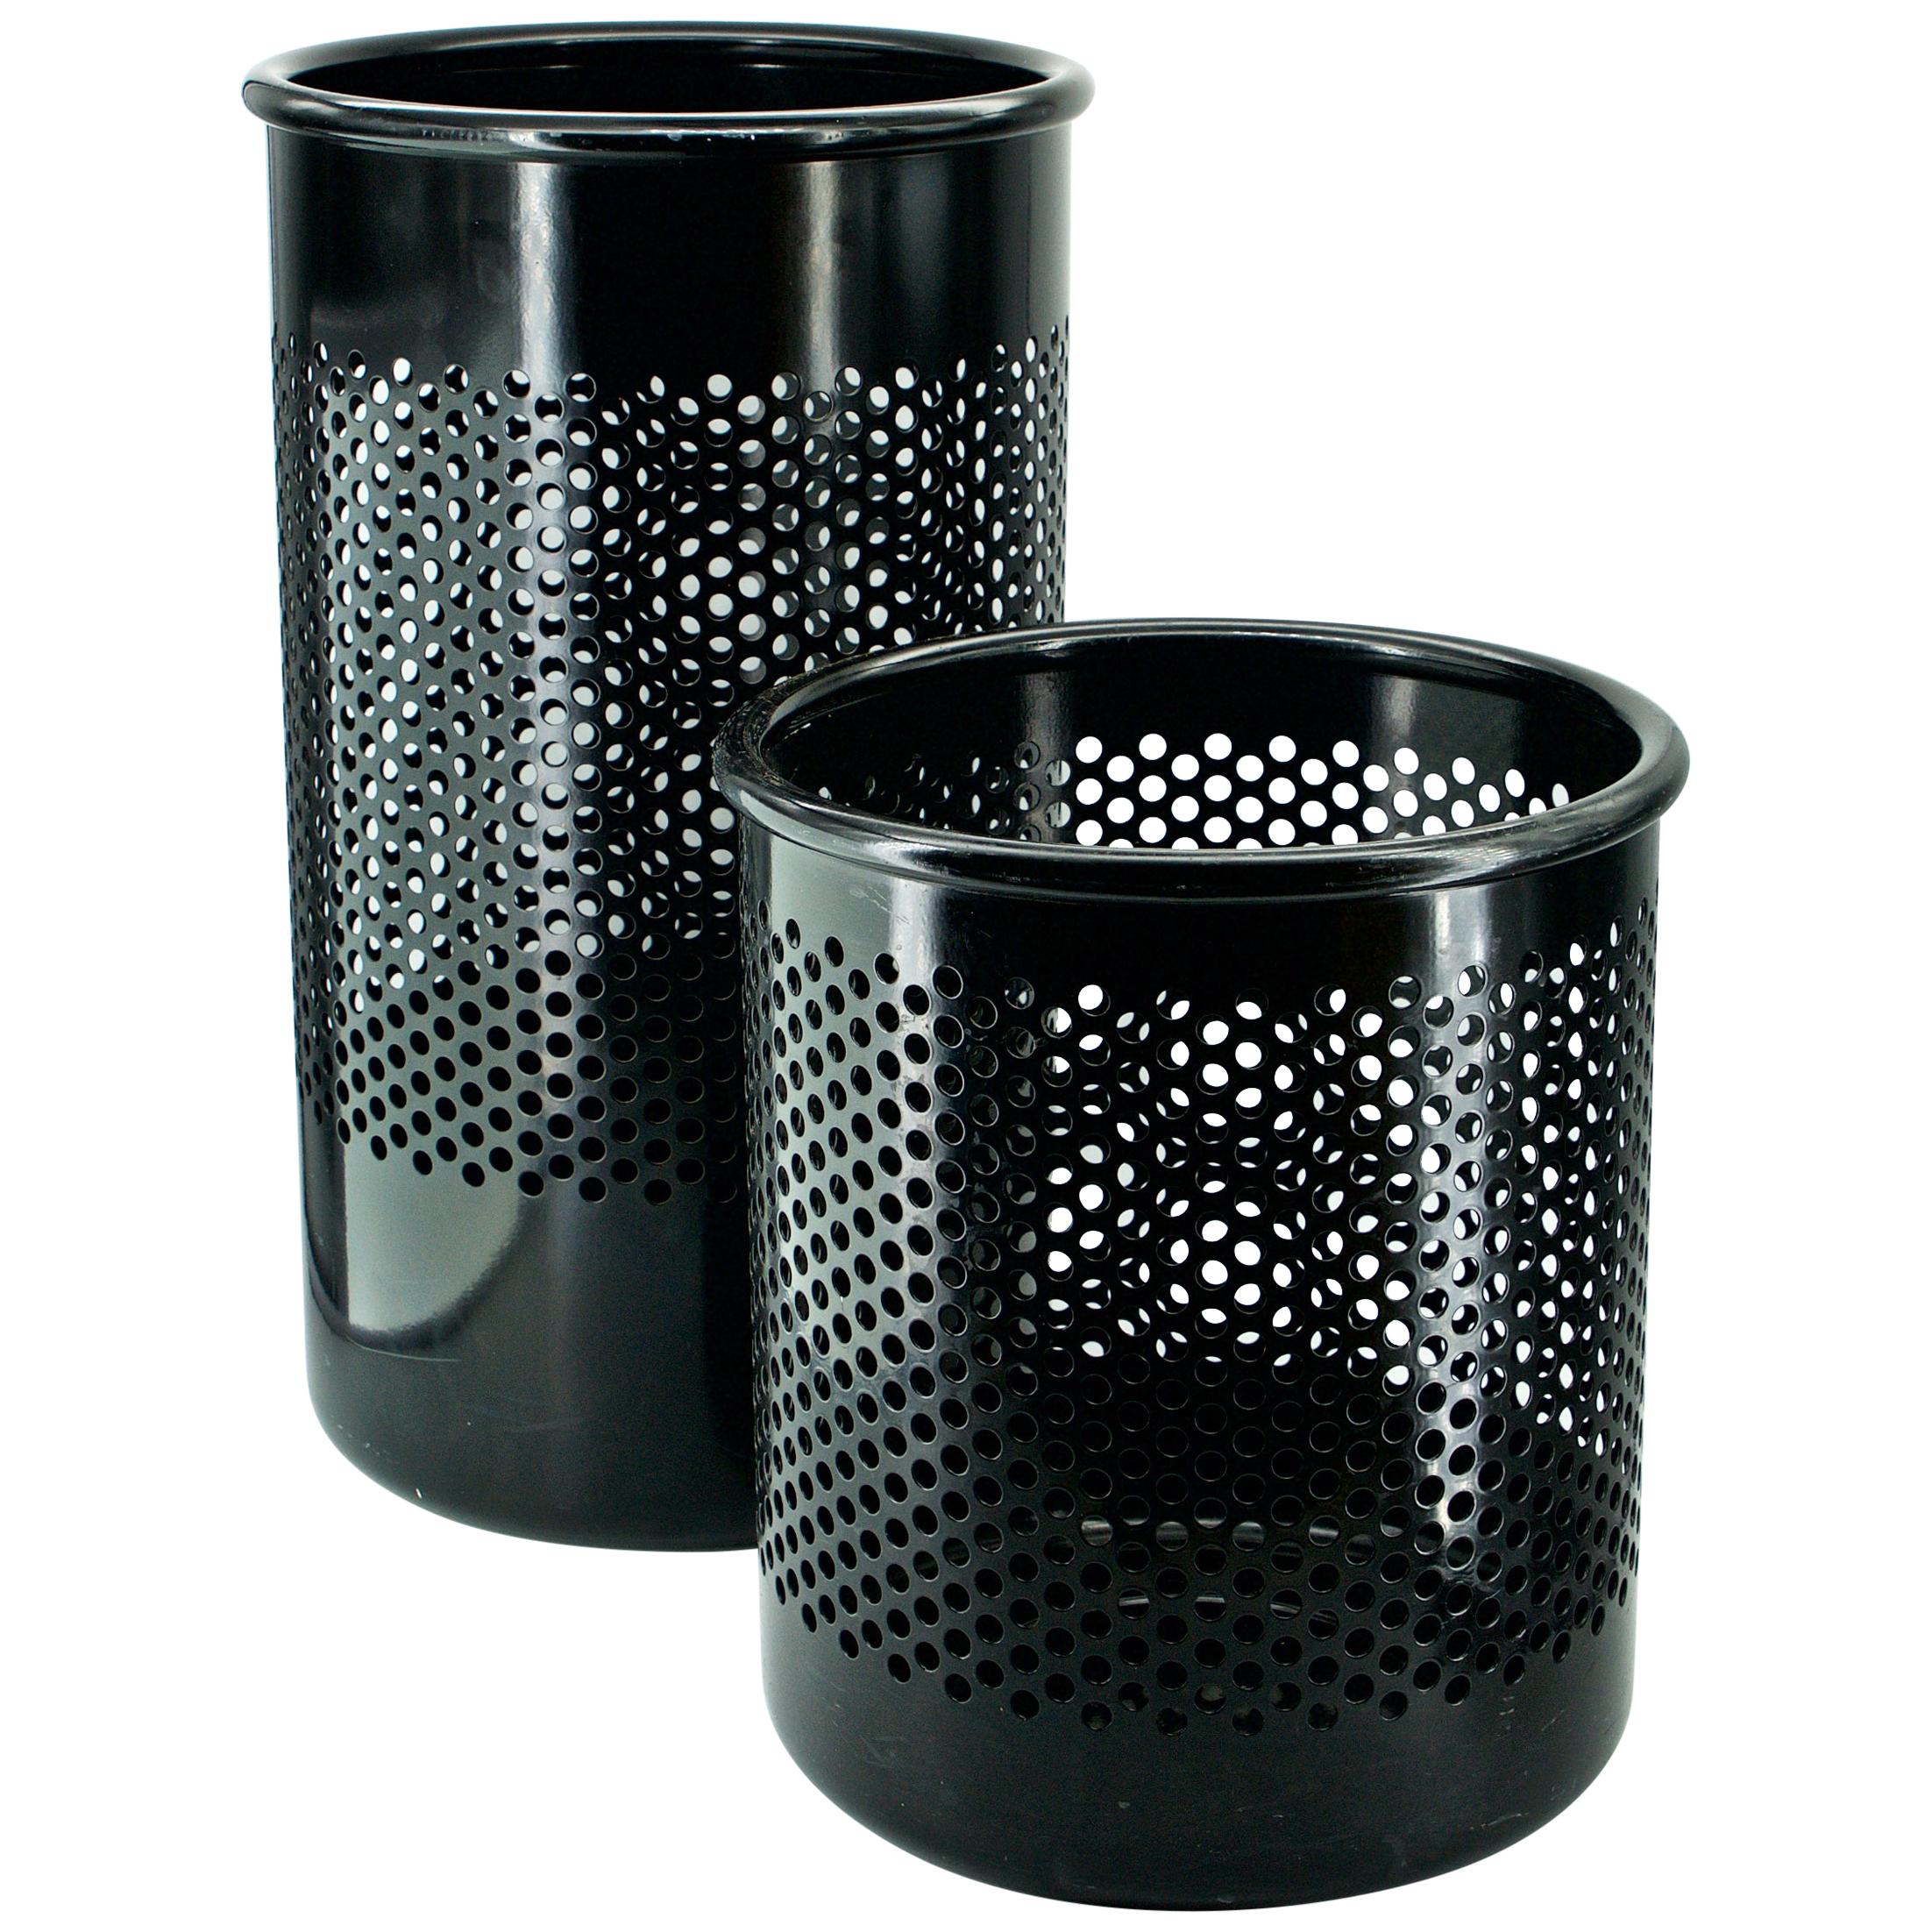 Perforated Metal Office Wastebaskets Trash Cans Italy Memphis Sottsass Ferrari